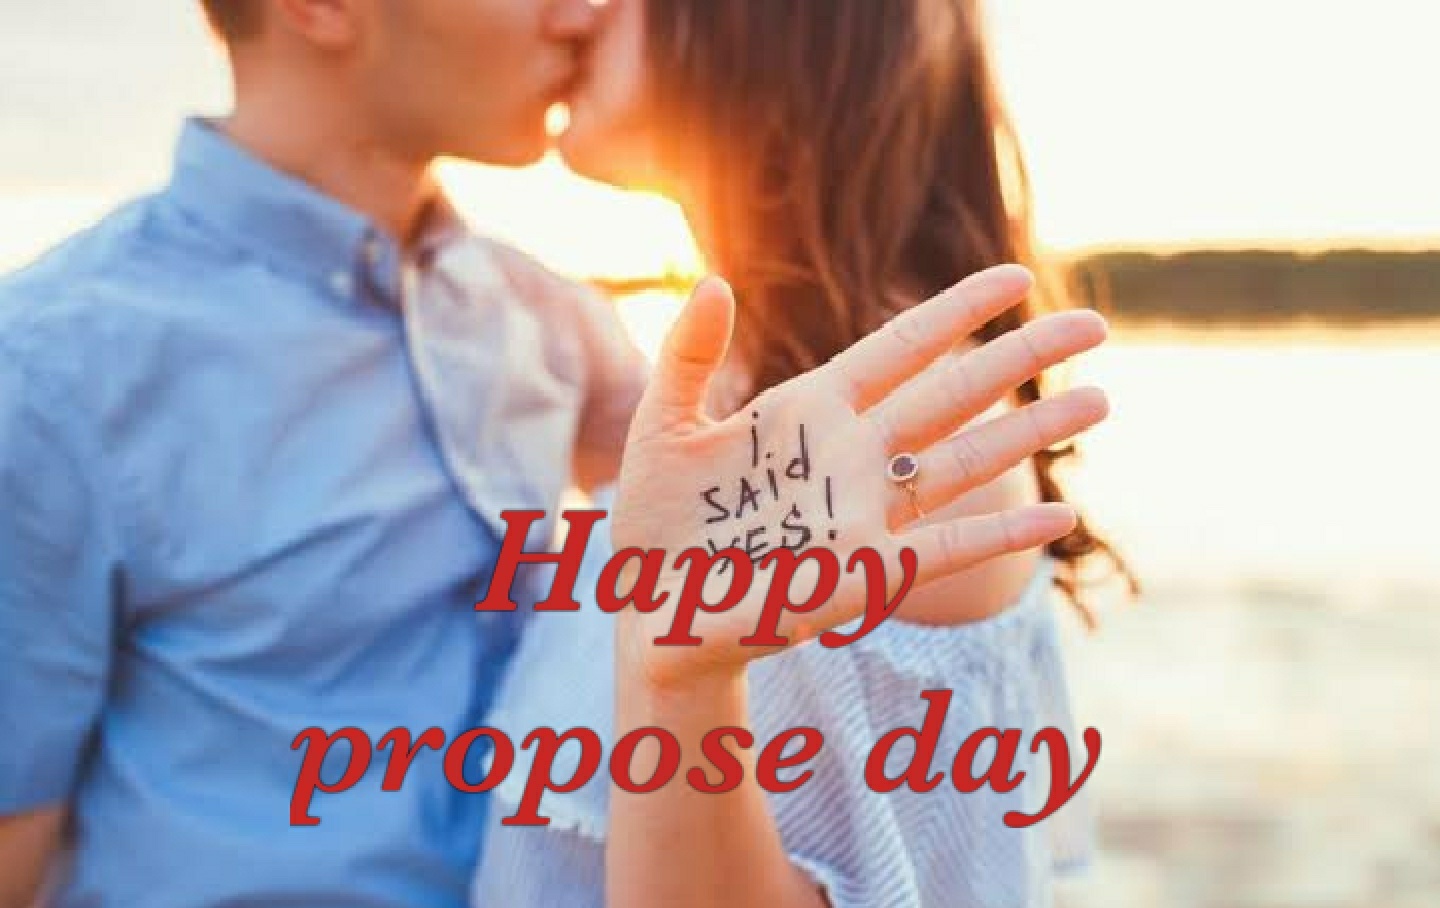 20 Propose Day Images About Proposing Someone Special - Romance , HD Wallpaper & Backgrounds